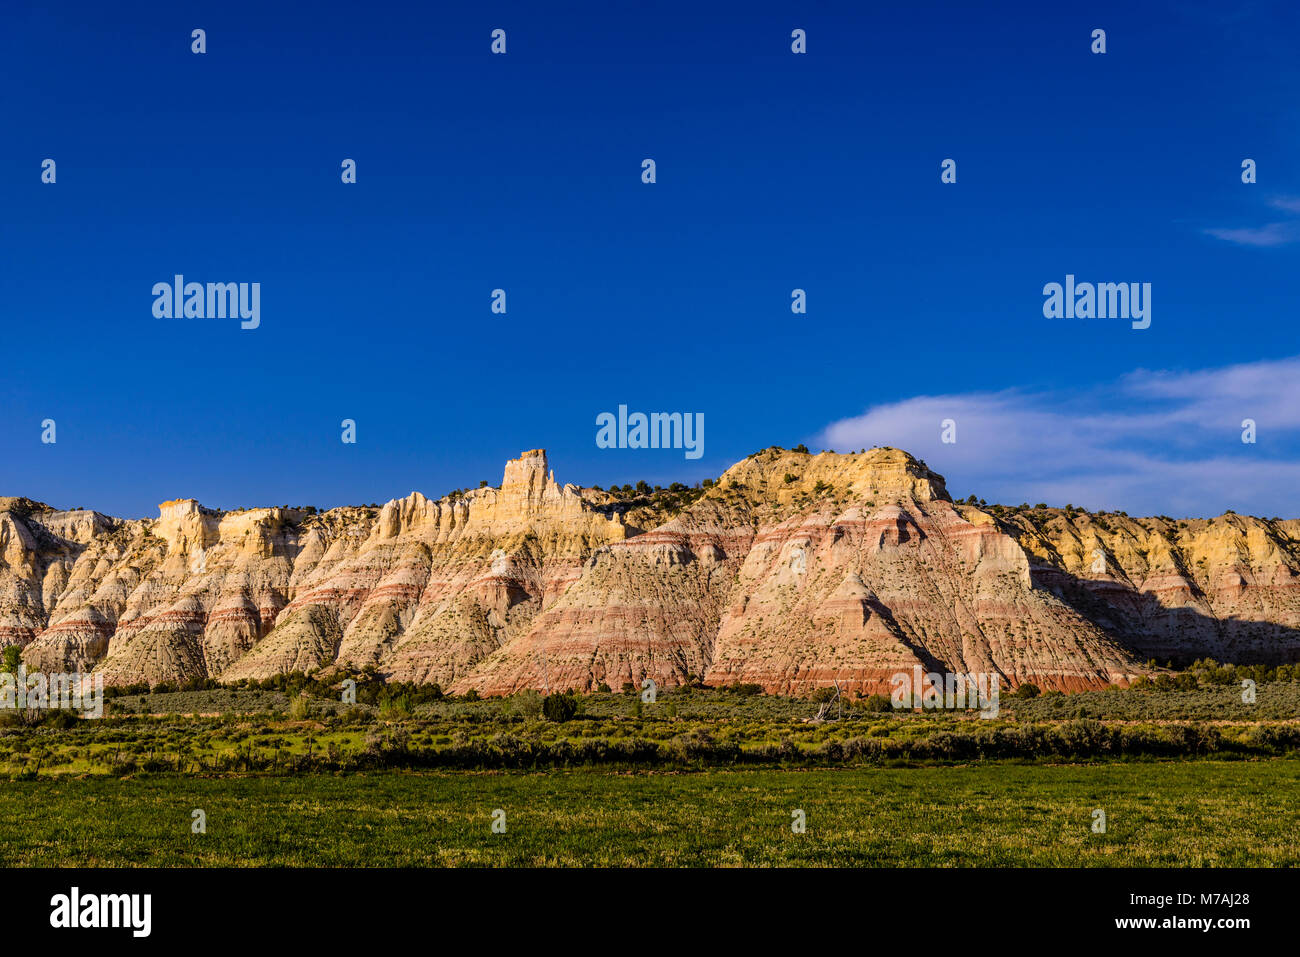 The USA, Utah, Garfield County, Bryce Valley, Cannonville, scenery in the Scenic Byway 12 Stock Photo